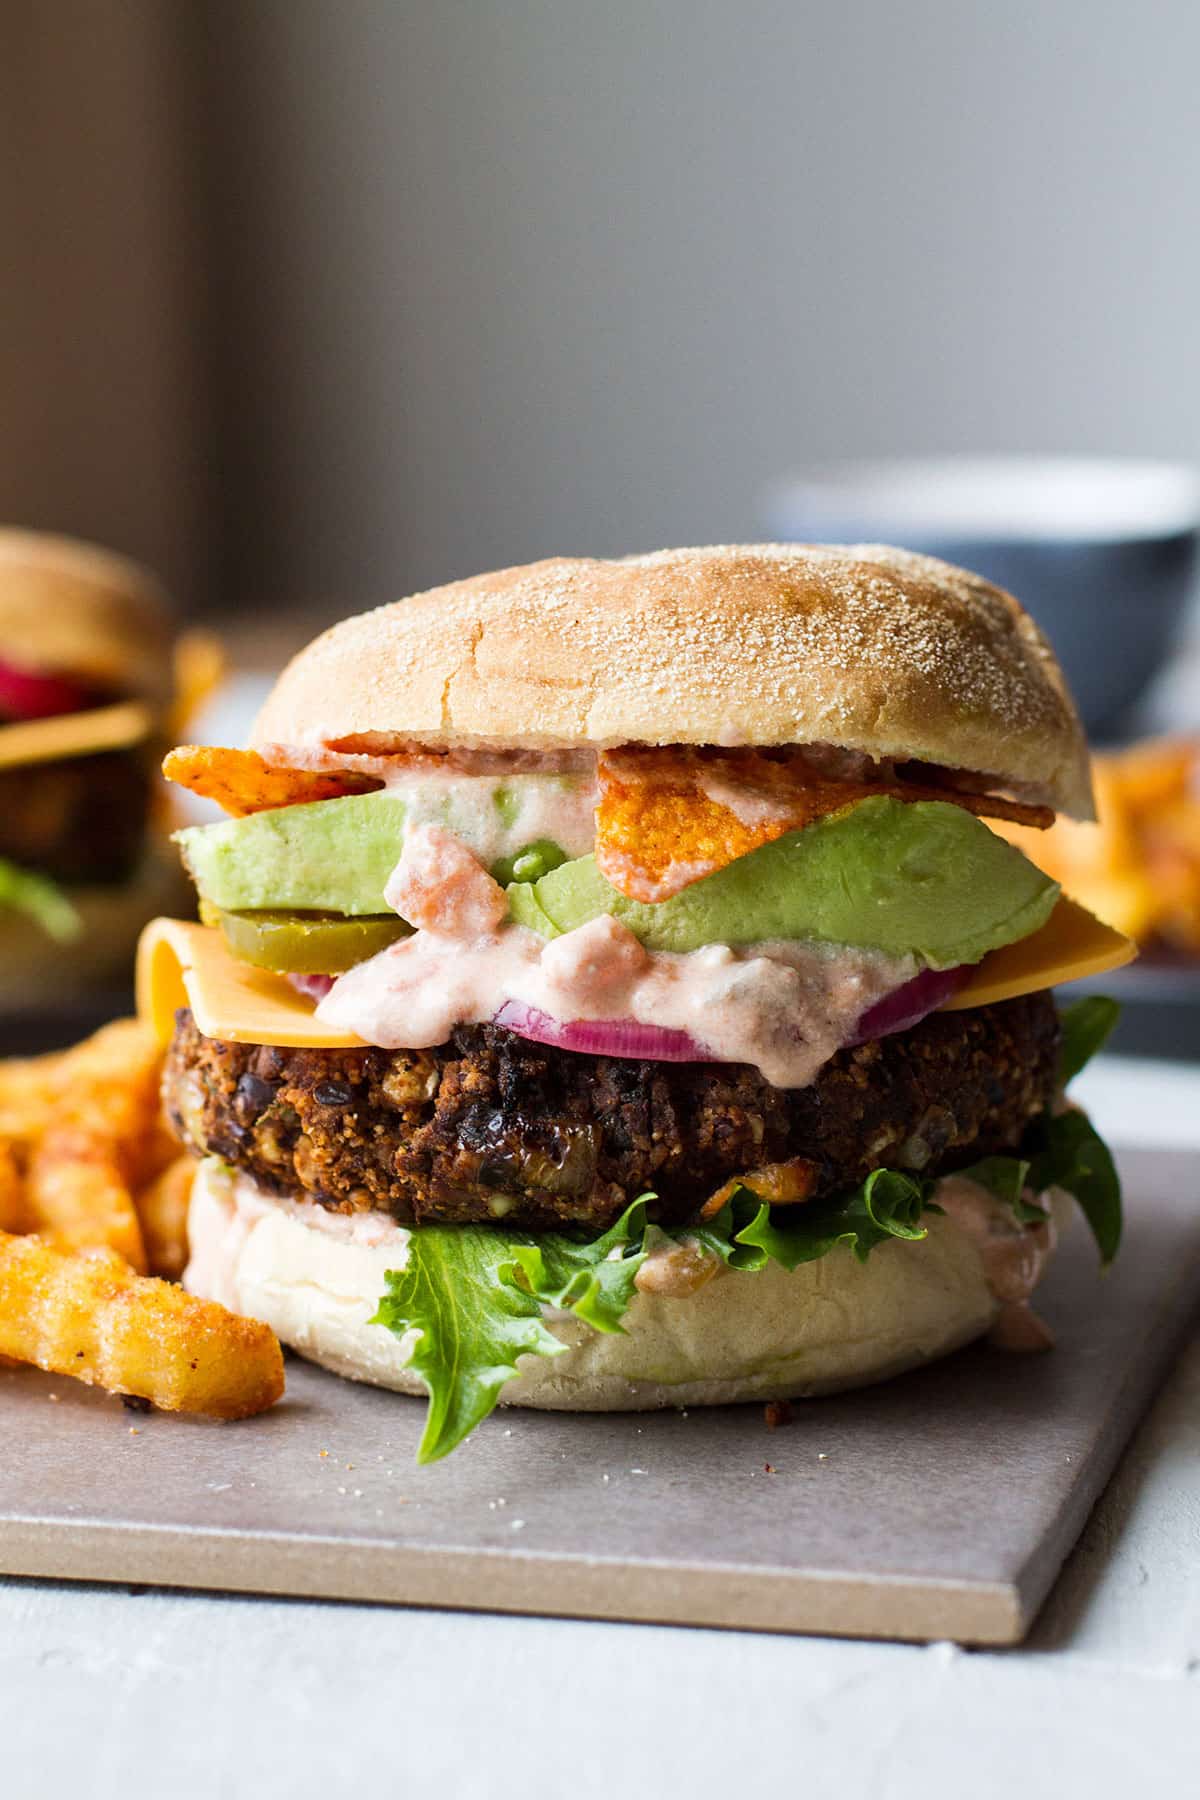 Vegetarian burger with lots of sauce and avocado.